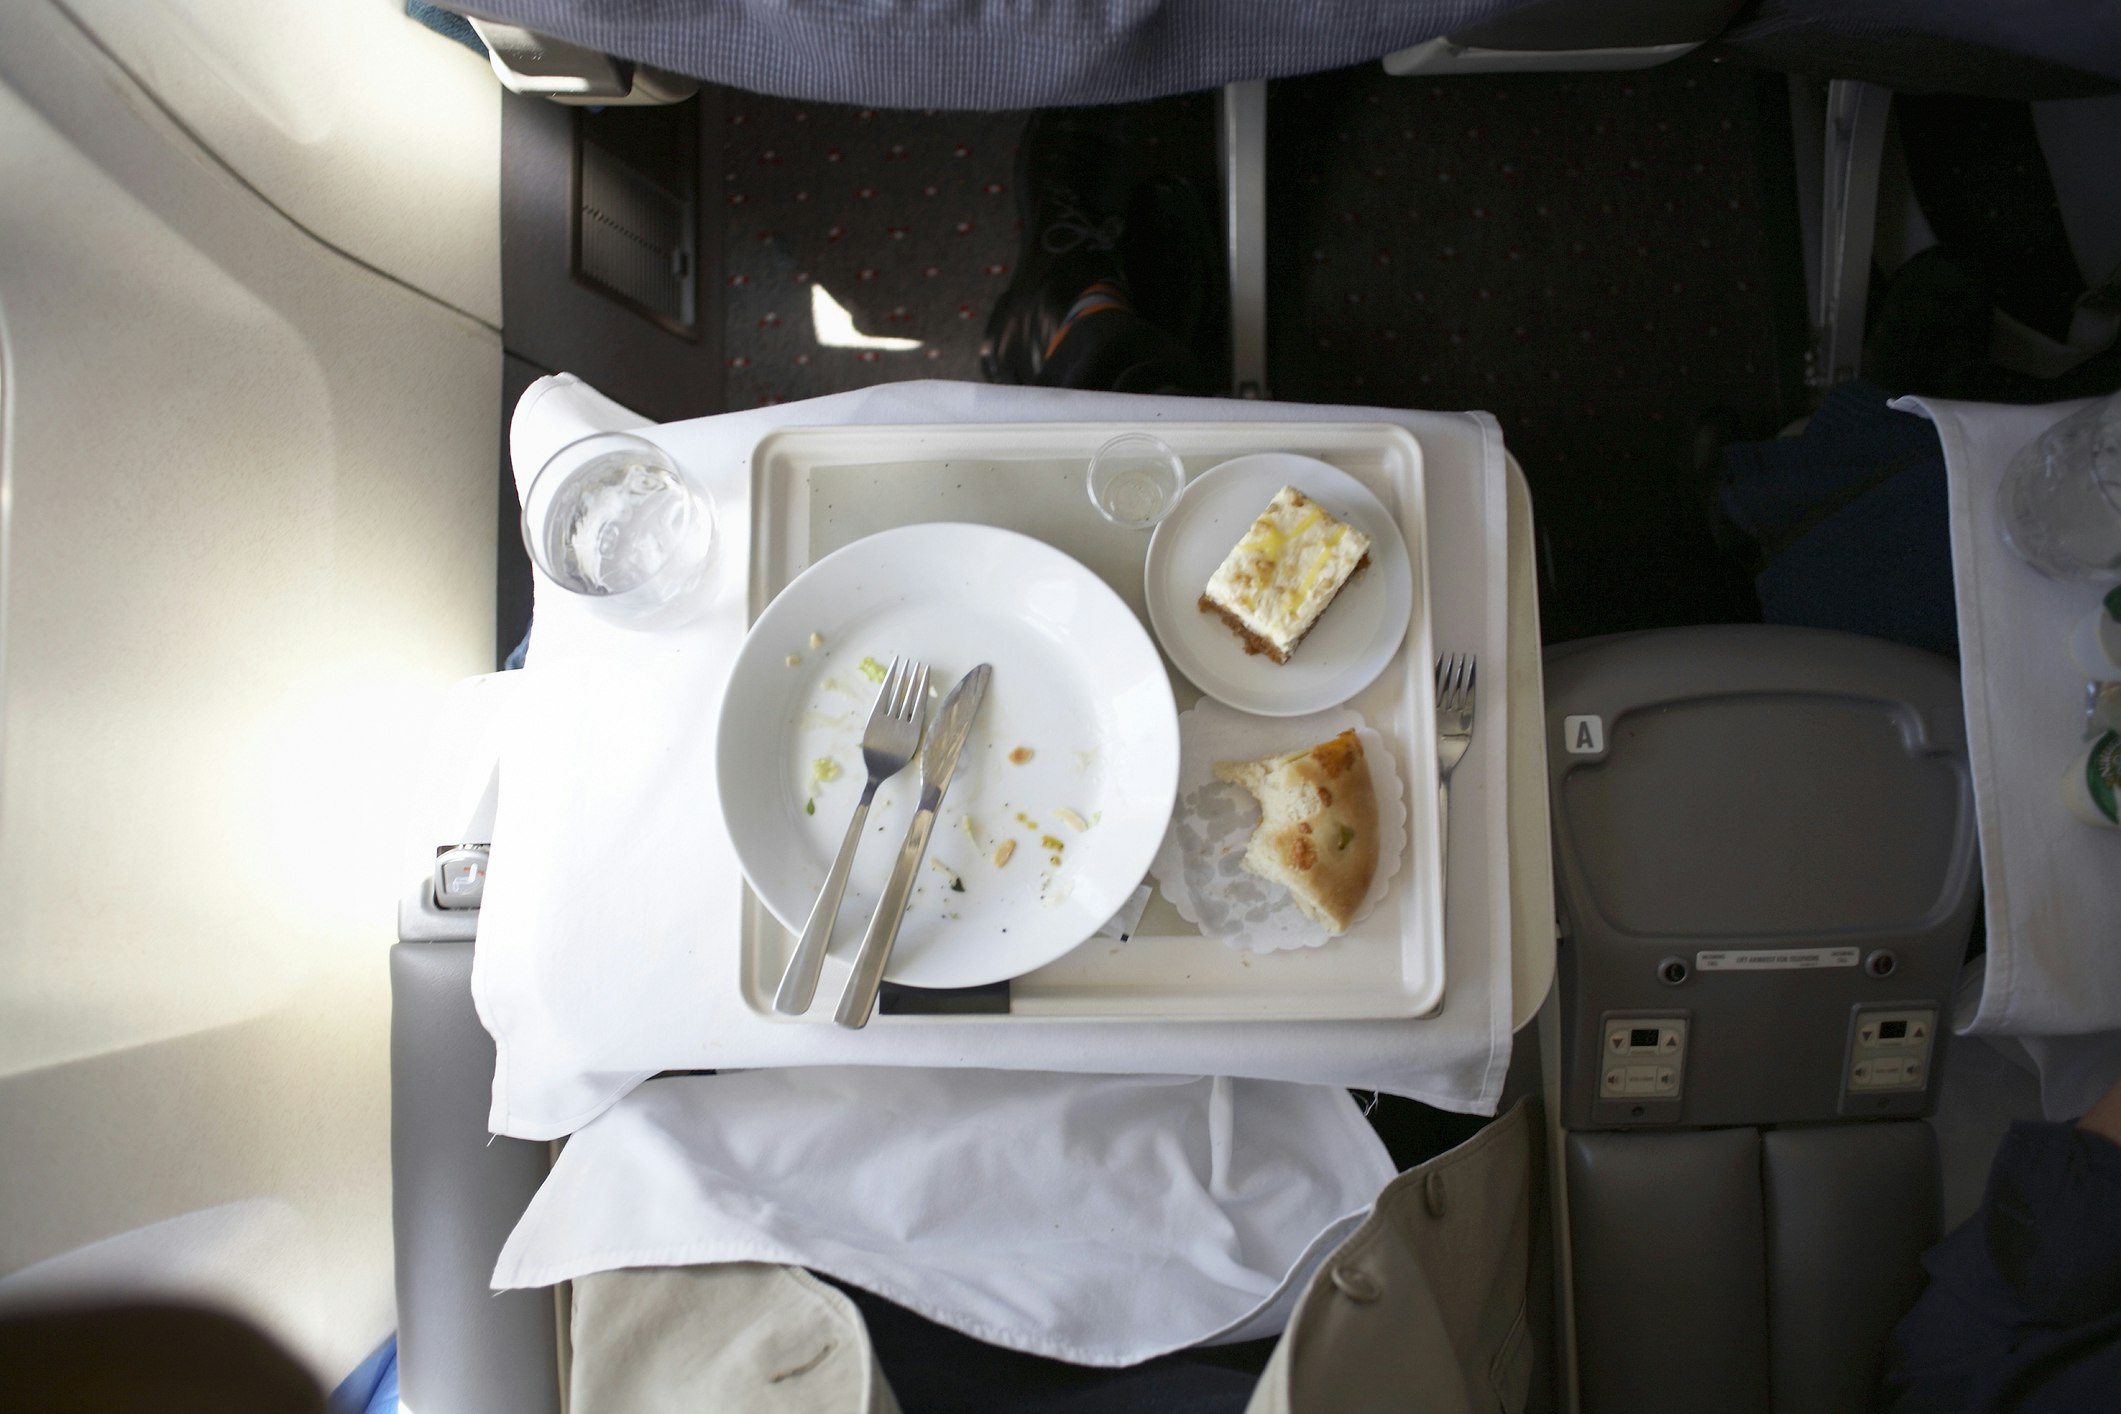 Travel News - Plate and cutlery on tray table in airplane, overhead view